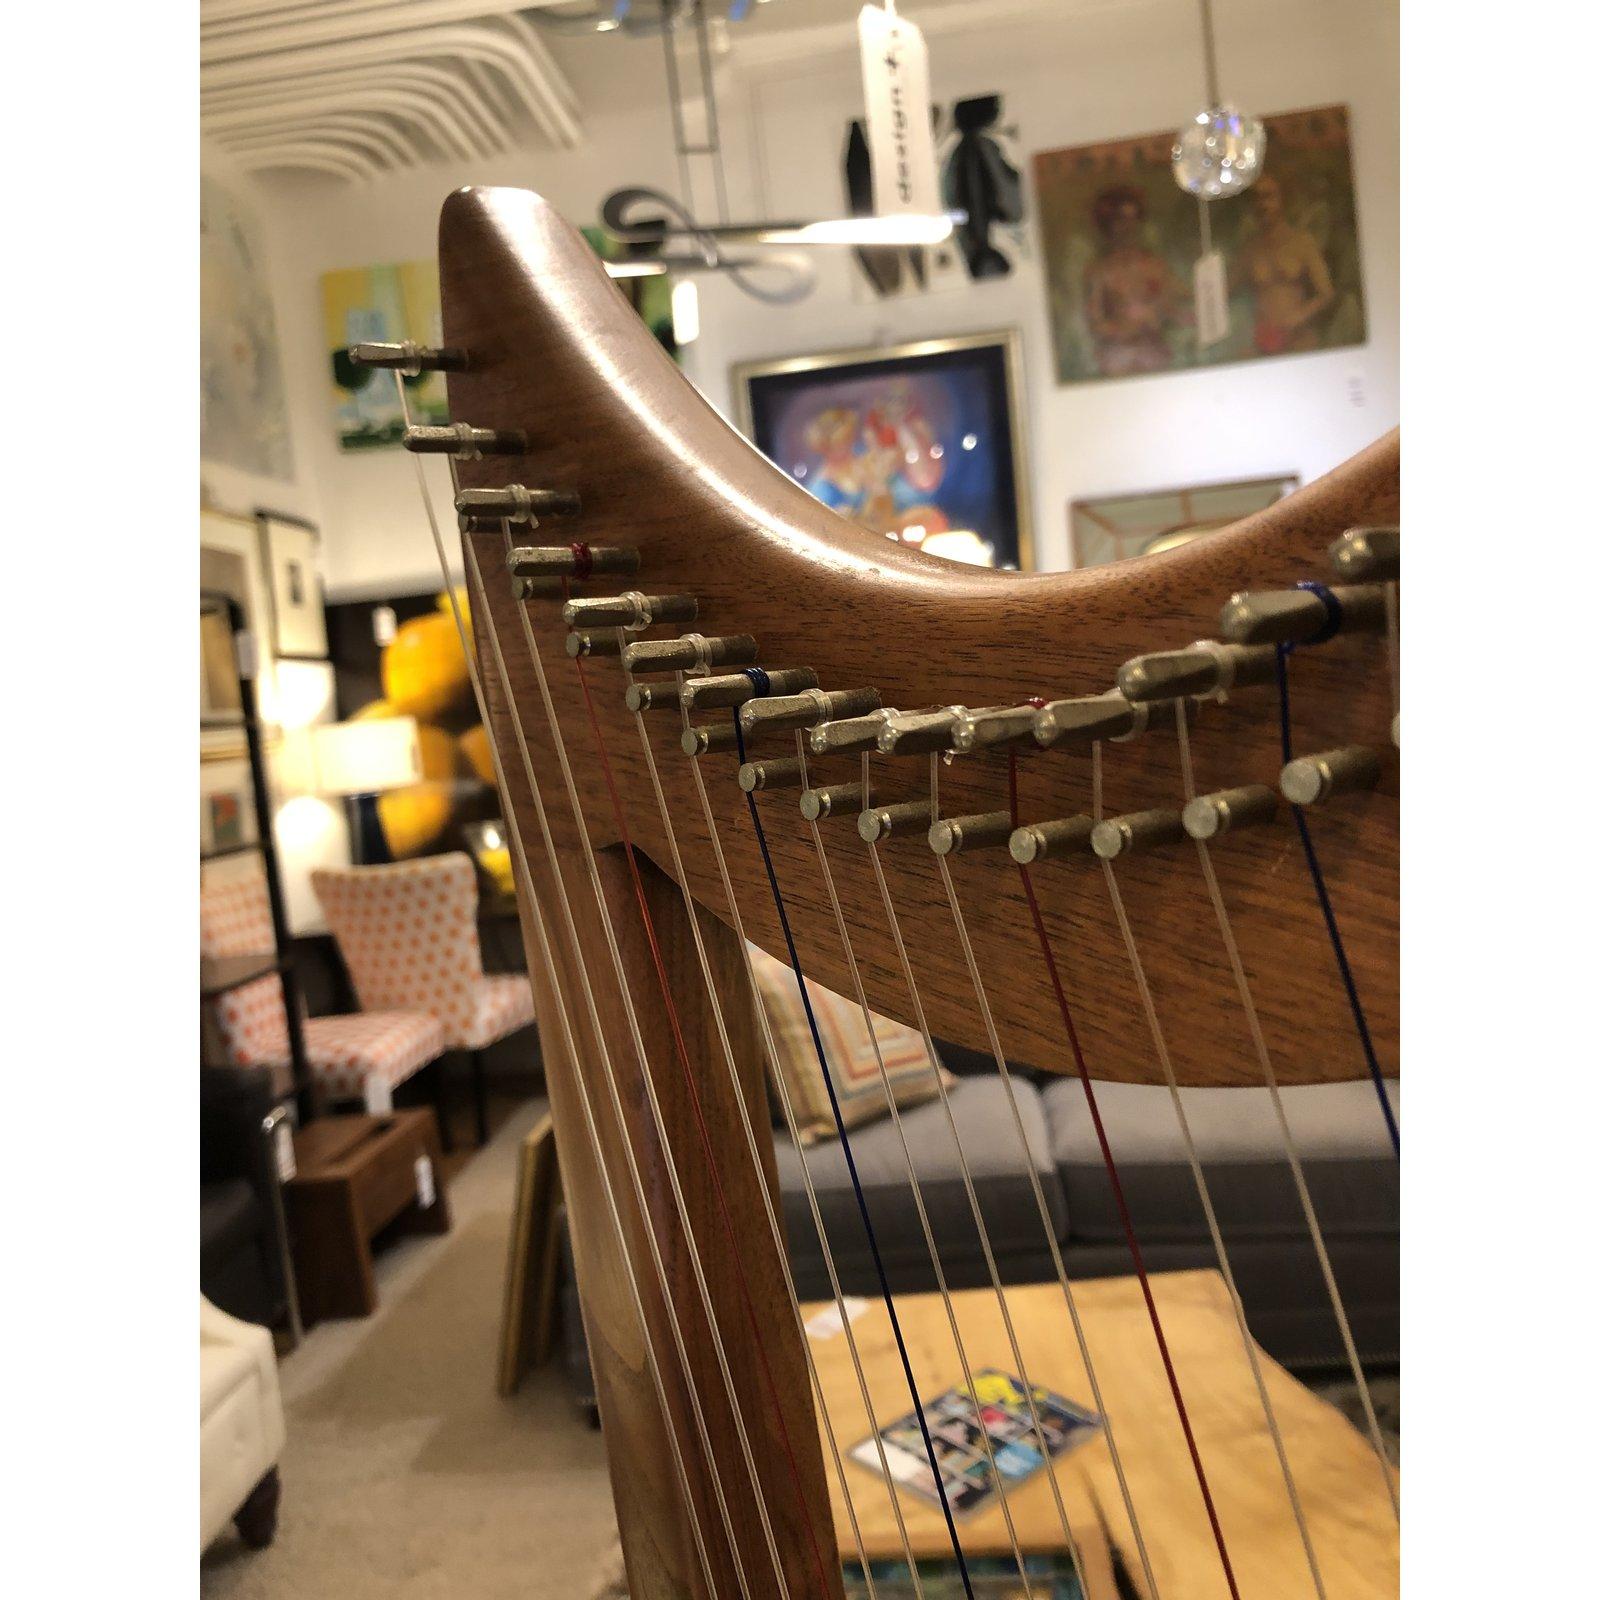 An Eve 22 Lamp Harp by Stoney End. A Gothic-style lap harp with 22 strings, offering three octaves from G to G. Light-weight and compact, this harp is perfect for travel and has rich tone and surprising volume for its size. The wood is a